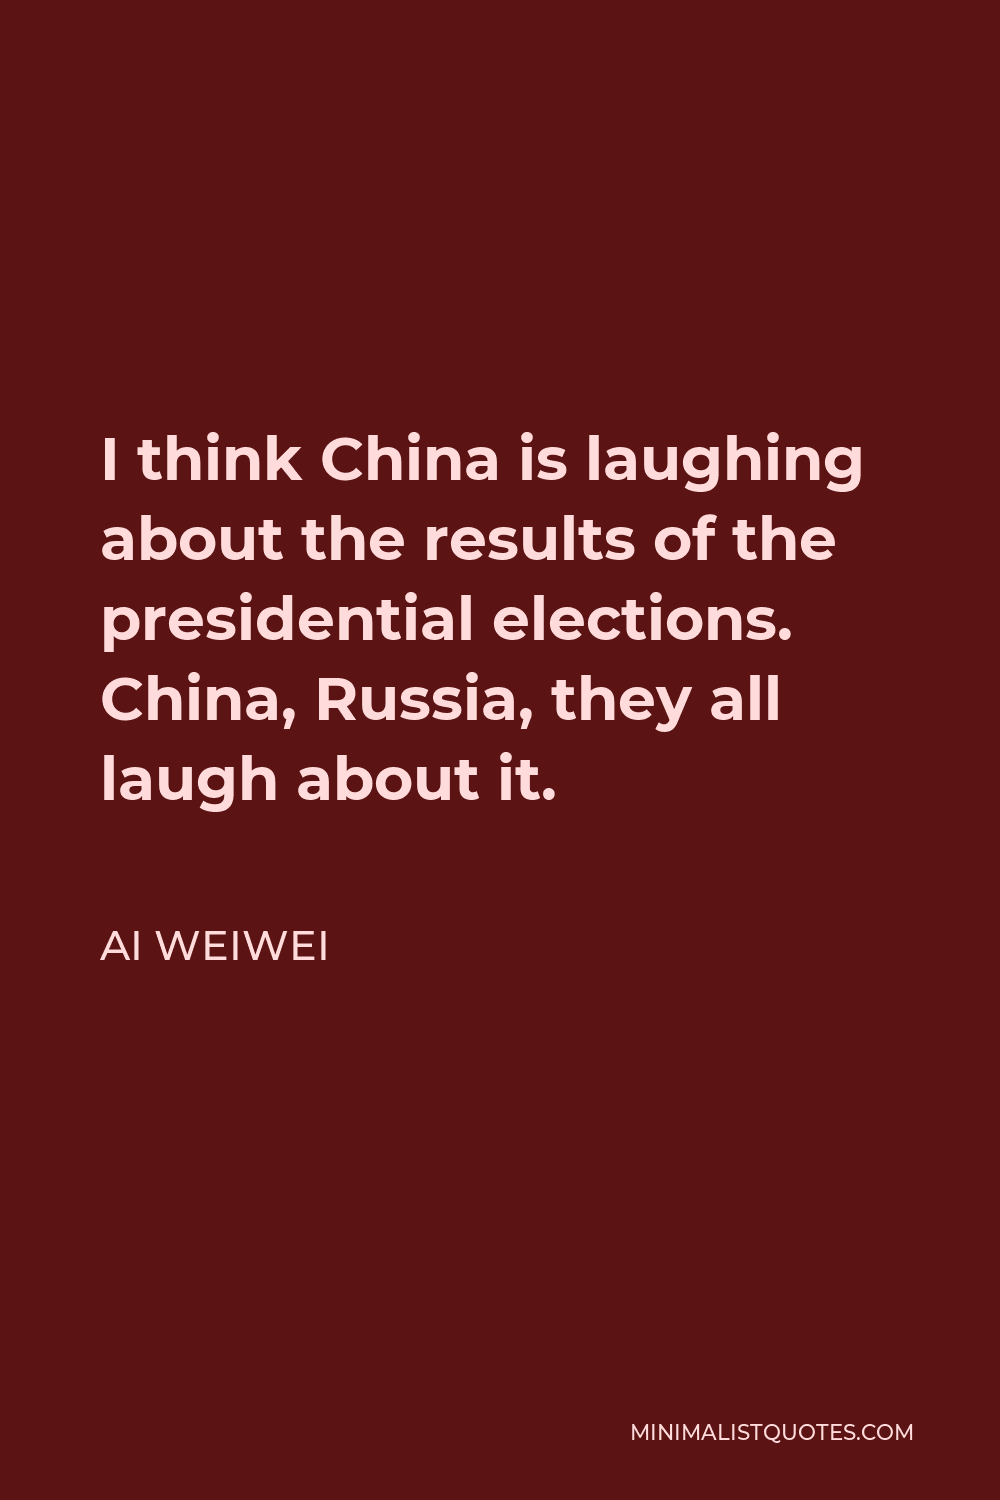 Ai Weiwei Quote - I think China is laughing about the results of the presidential elections. China, Russia, they all laugh about it.